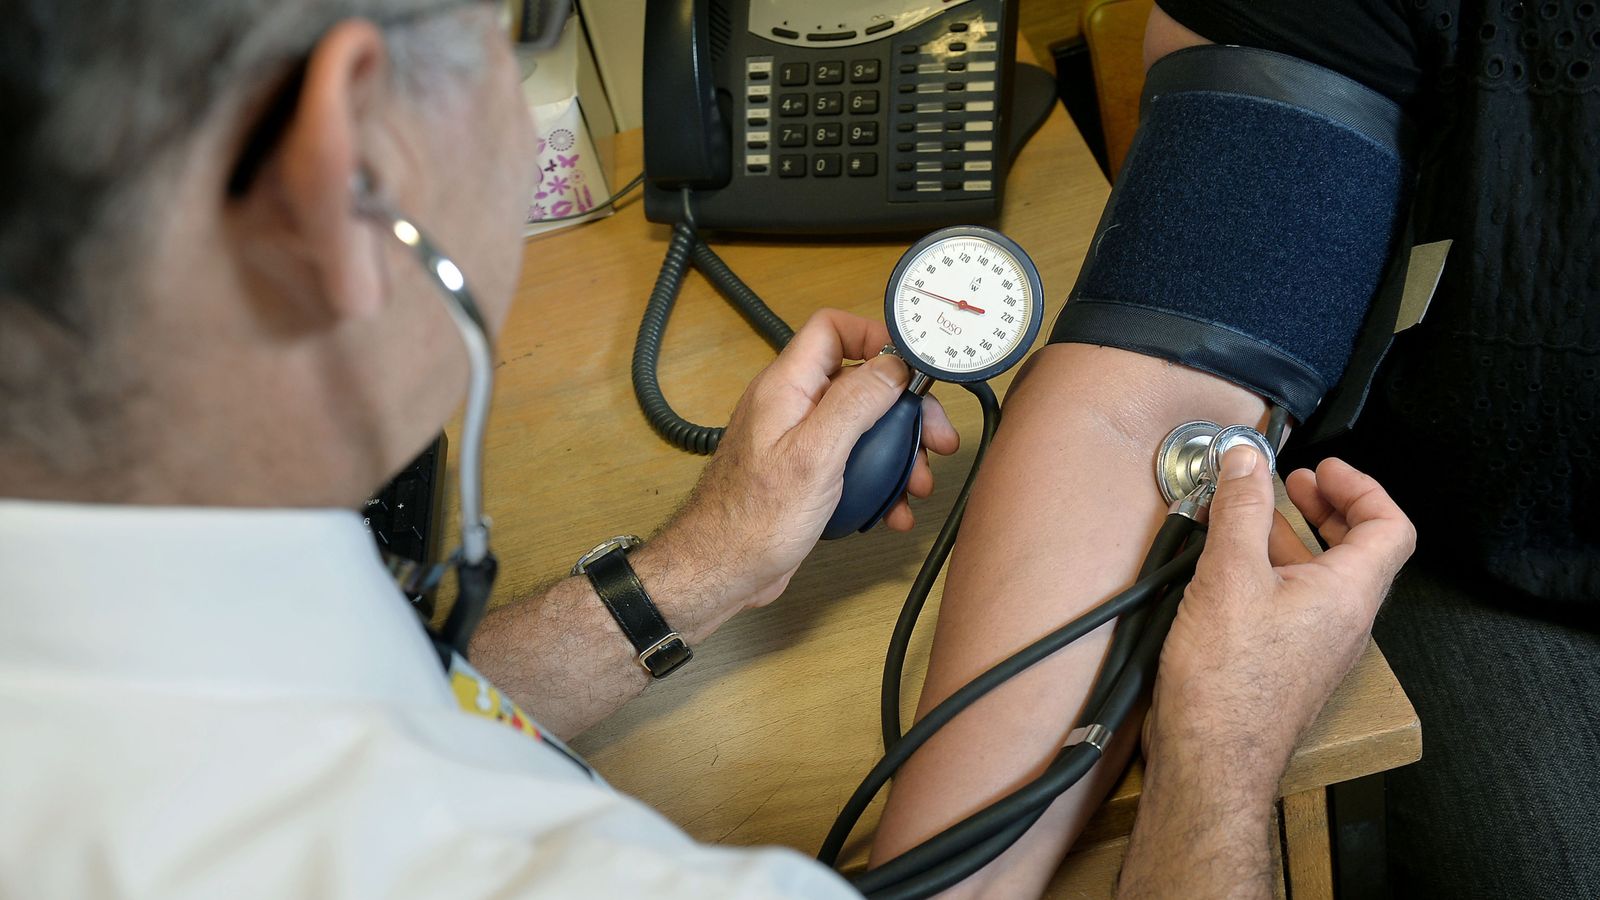 Health secretary pledges end to '8am scramble for GP appointments' with £240m funding